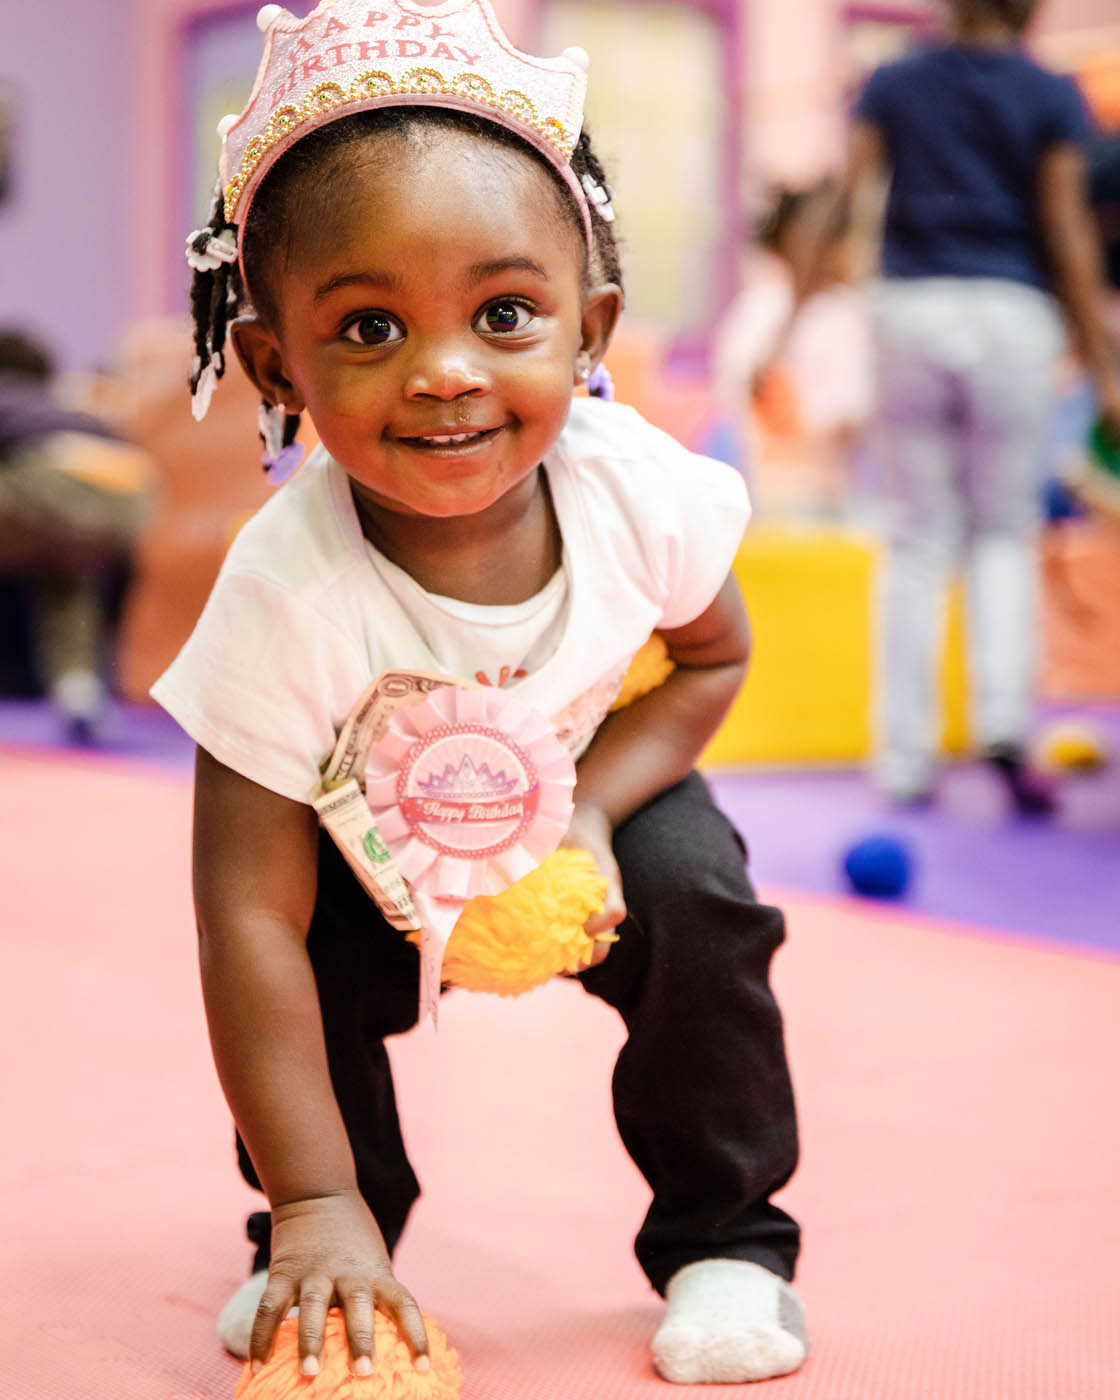 A toddler in a white shirt smiling at the camera, contact us today for toddler activities in Charlotte.